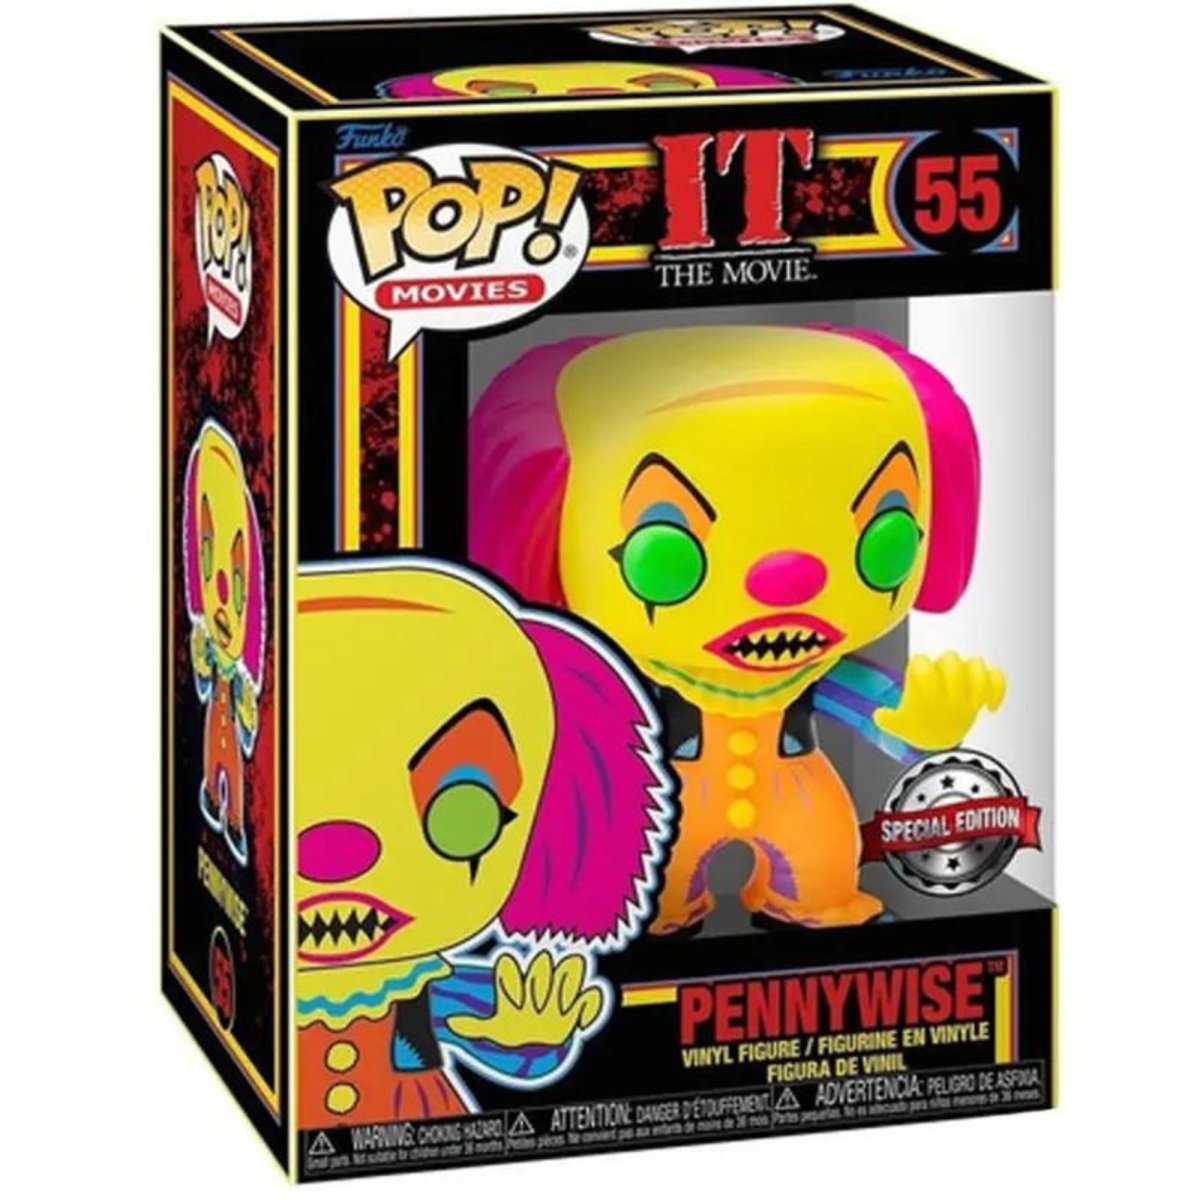 IT - Pennywise [Blacklight] (Special Edition) #55 - Funko Pop! Vinyl Movies - Persona Toys